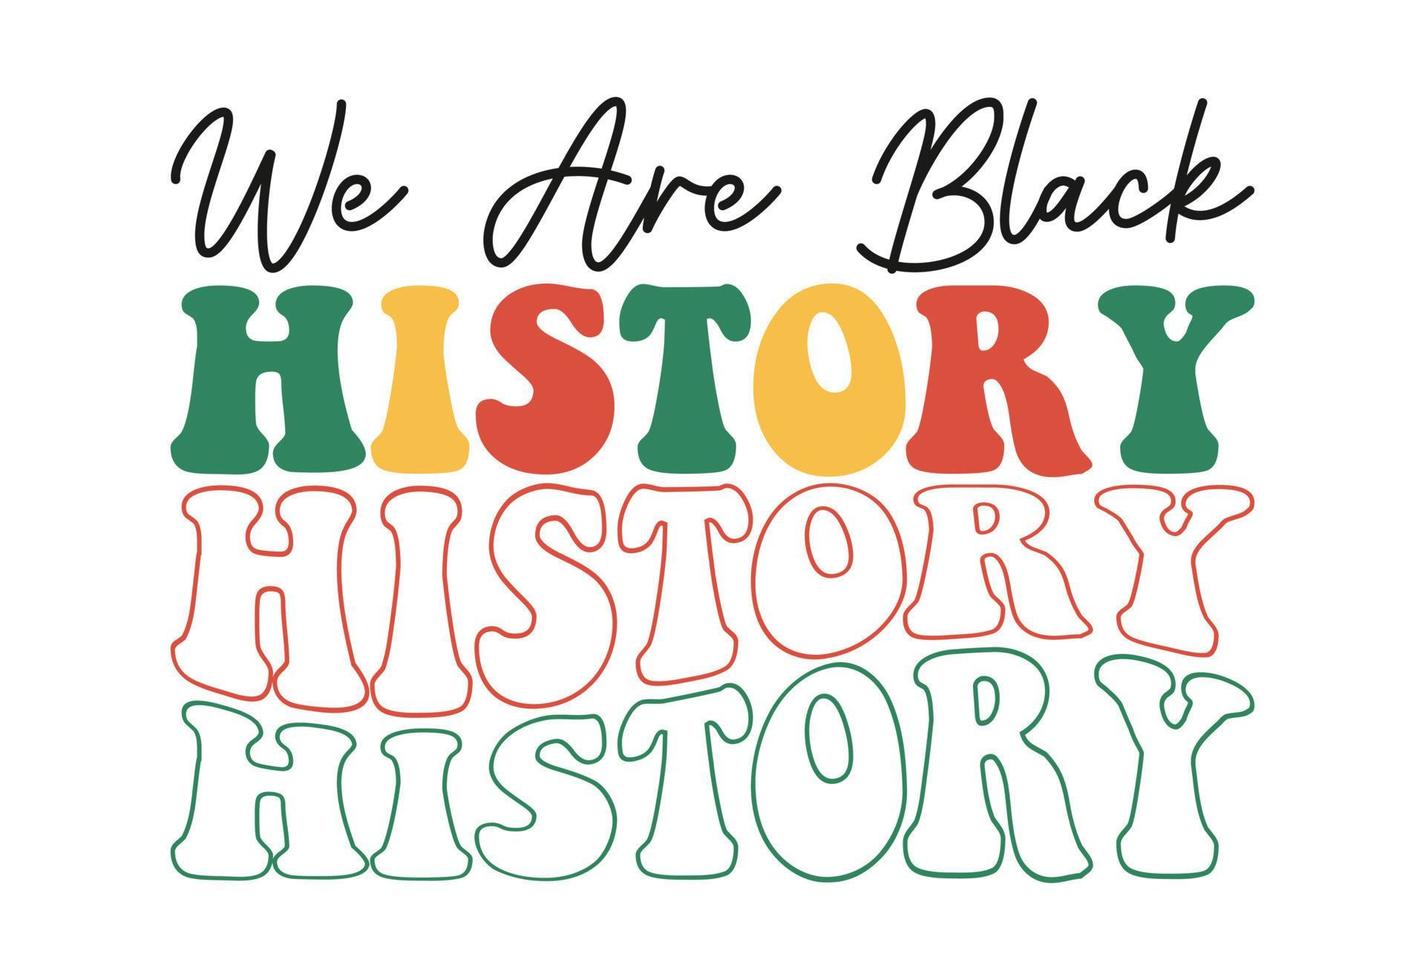 We Are Black History, Black History Month Quote vector